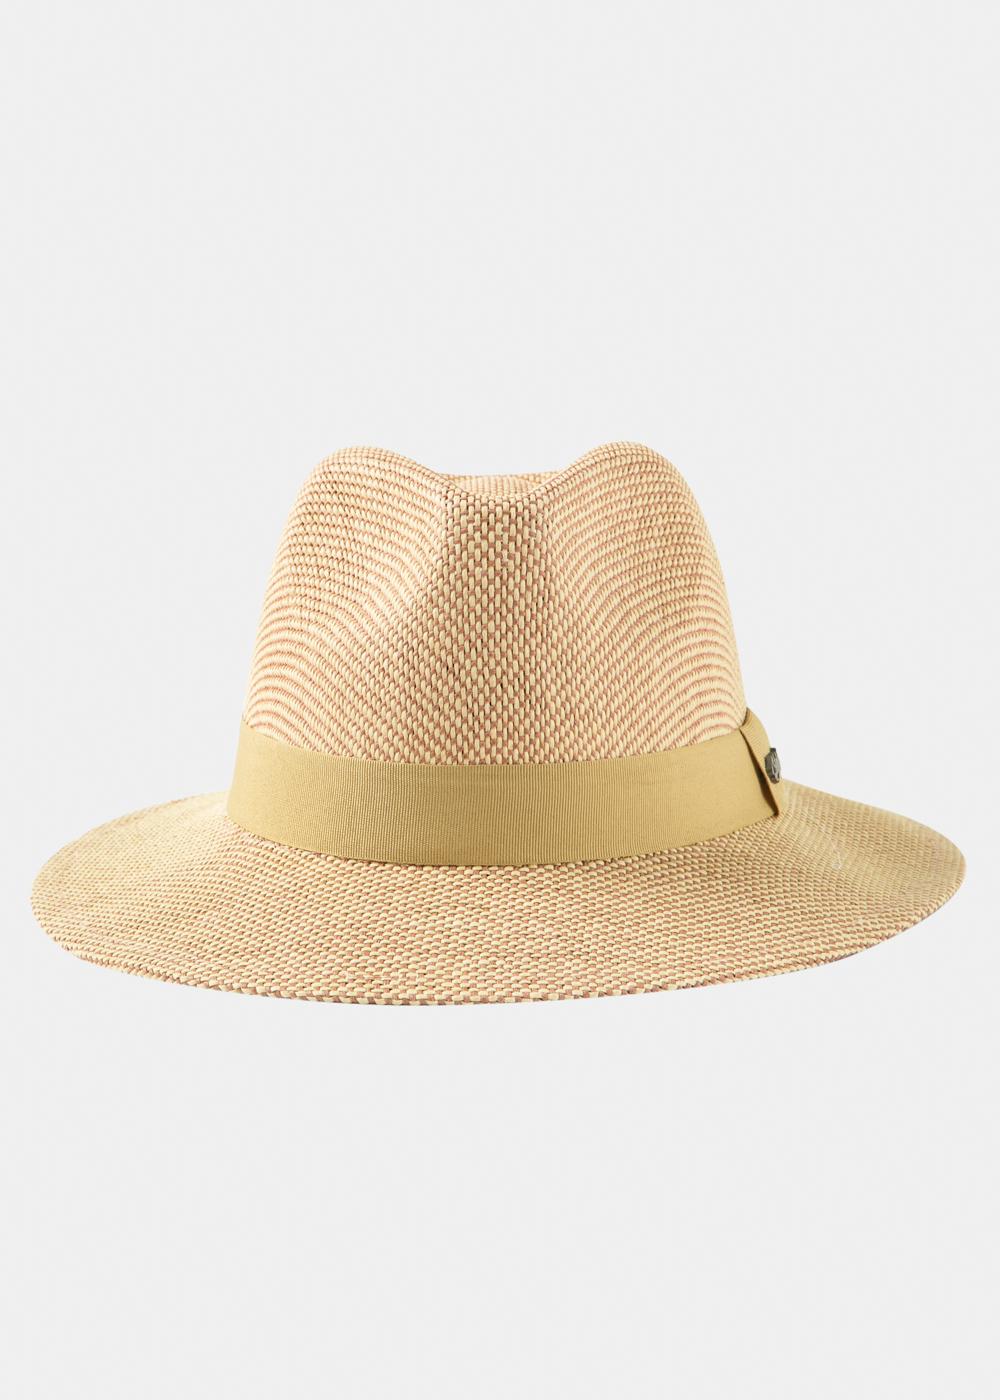 Brown Panama Style Hat w/ Olive Strap